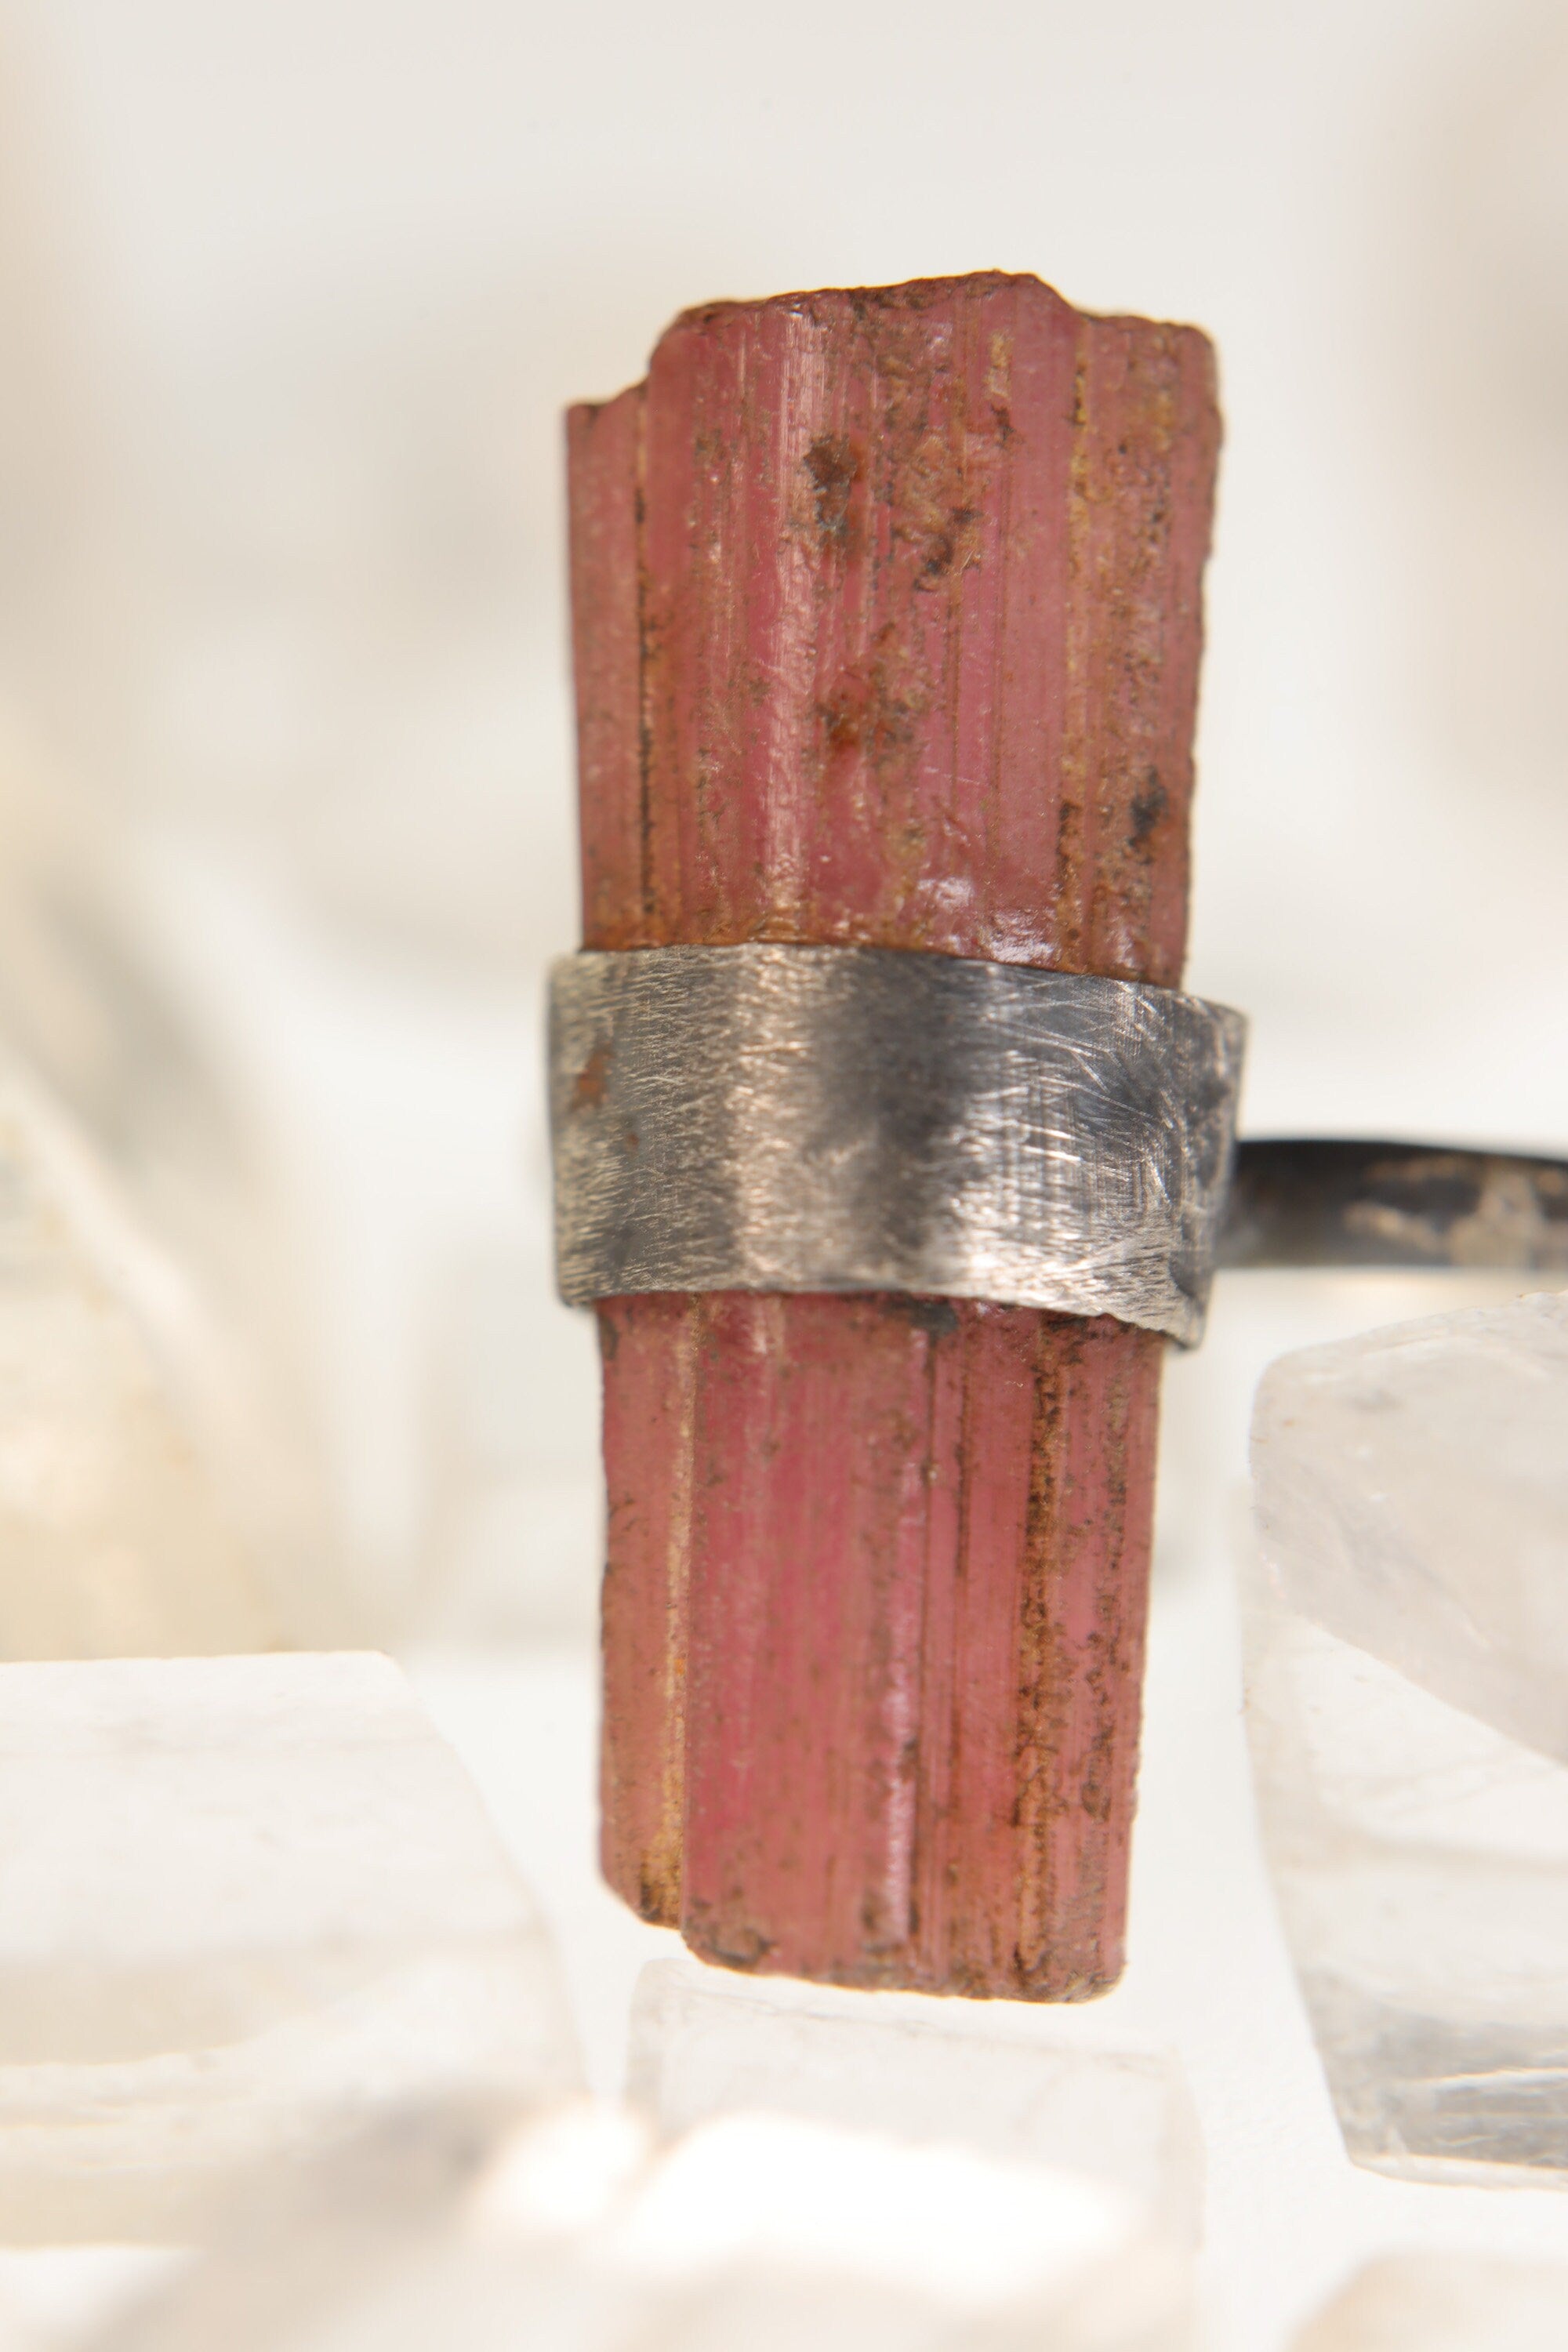 Blush Harmony: Textured & Oxidised Sterling Silver Ring with Raw Natural Pink Tourmaline - Size 6 1/4 US - NO/04